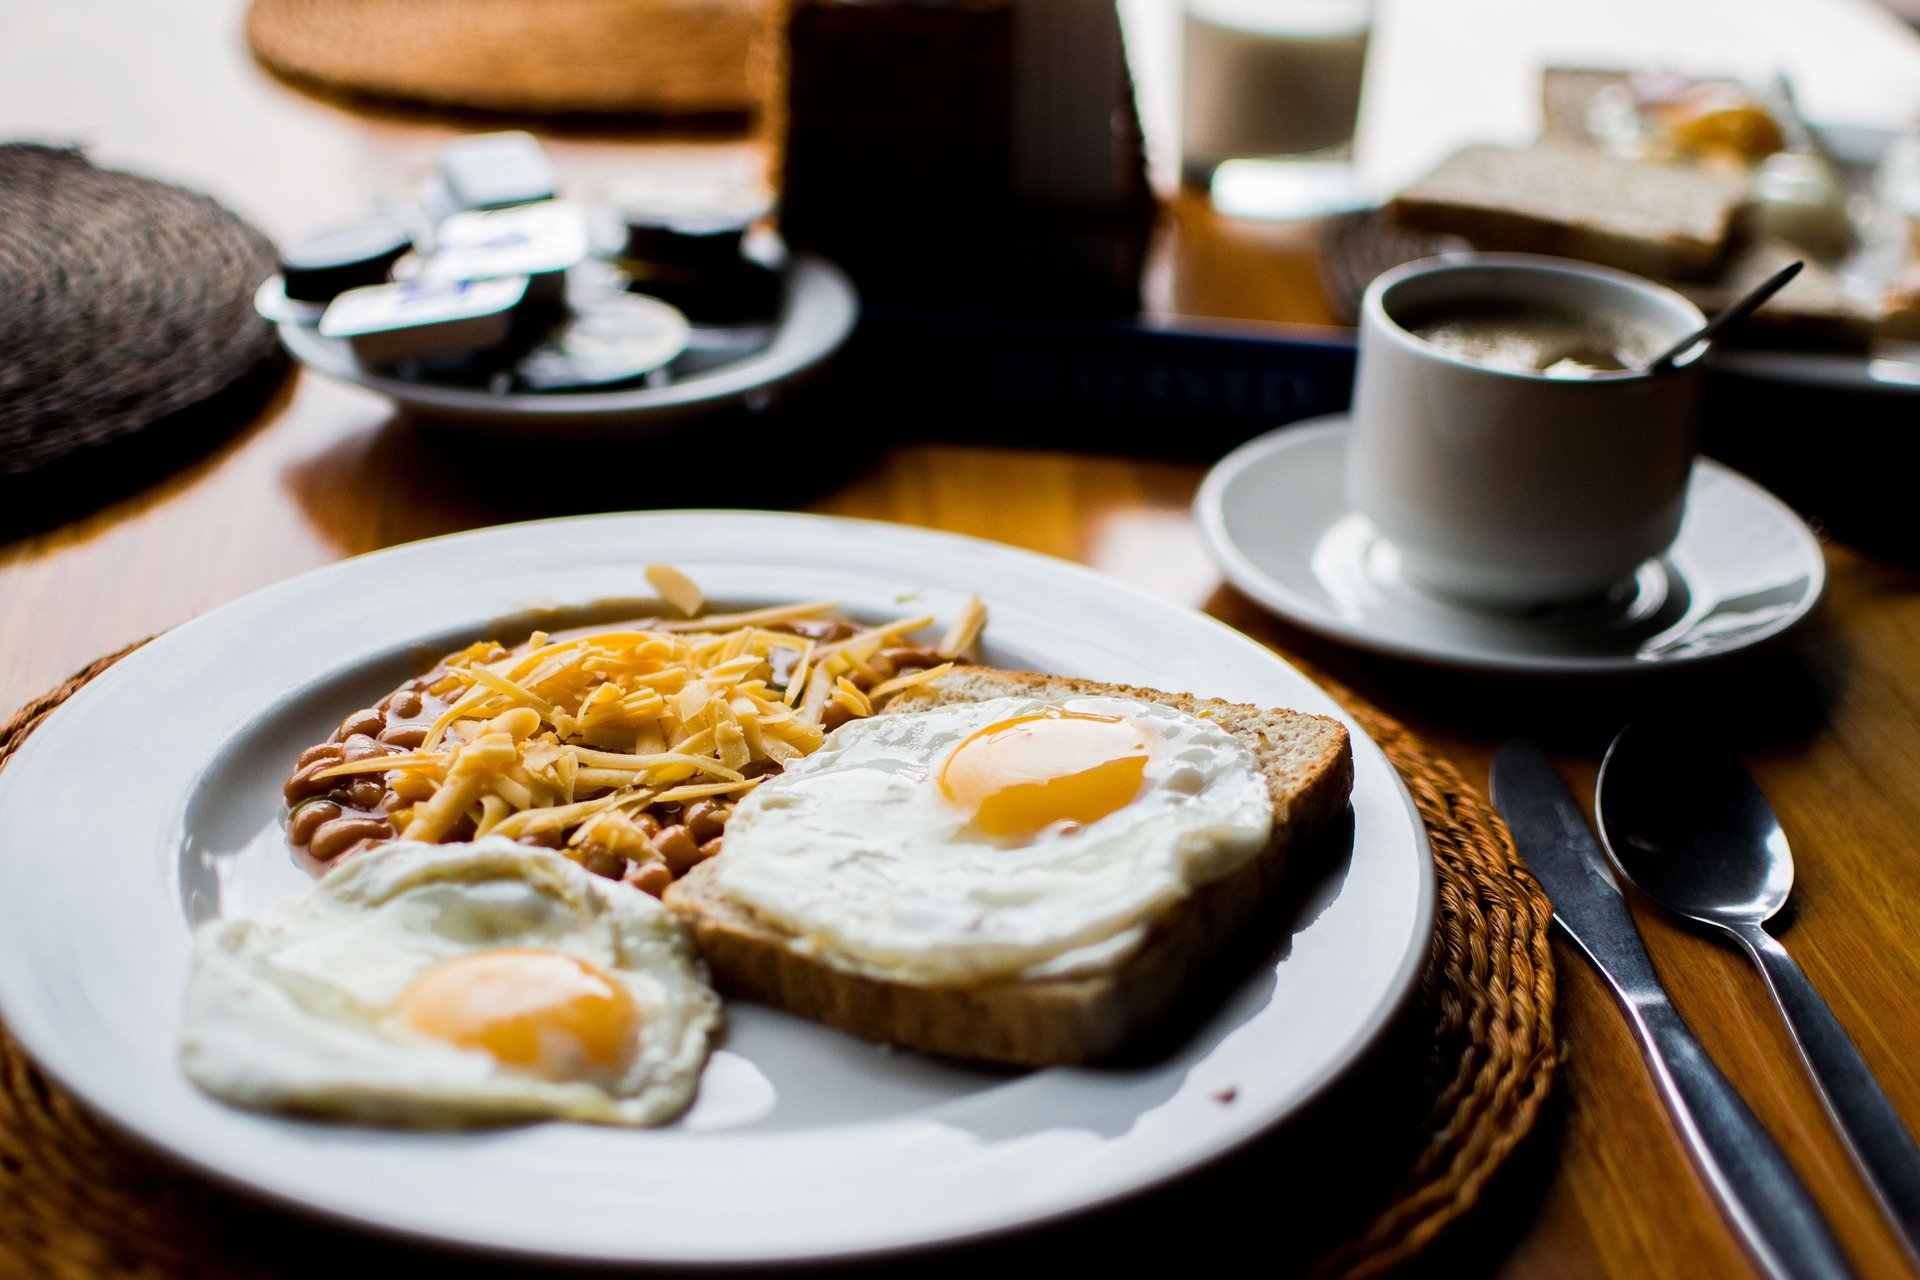 Breakfast with toast and eggs, and cheese, enjoyed with a cup of hot coffee. | Source: Pixabay.